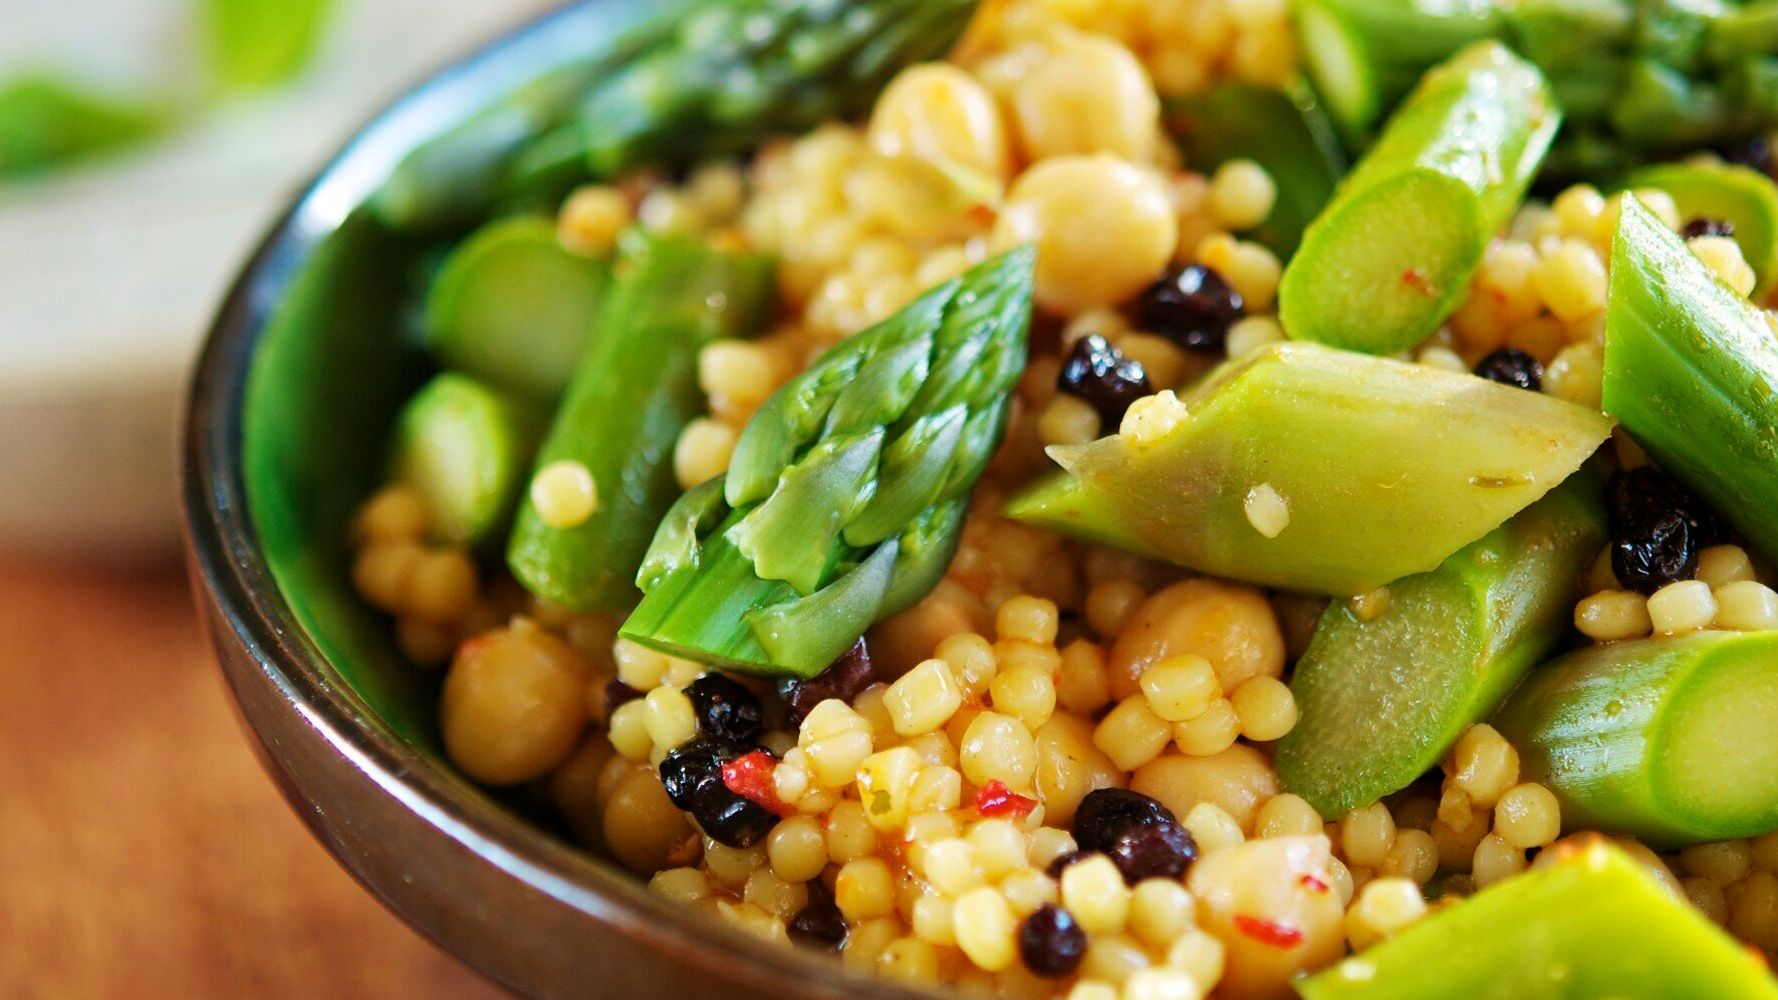 Healthy Vegetarian Diet Tips: How To Make Sure You Eat ...